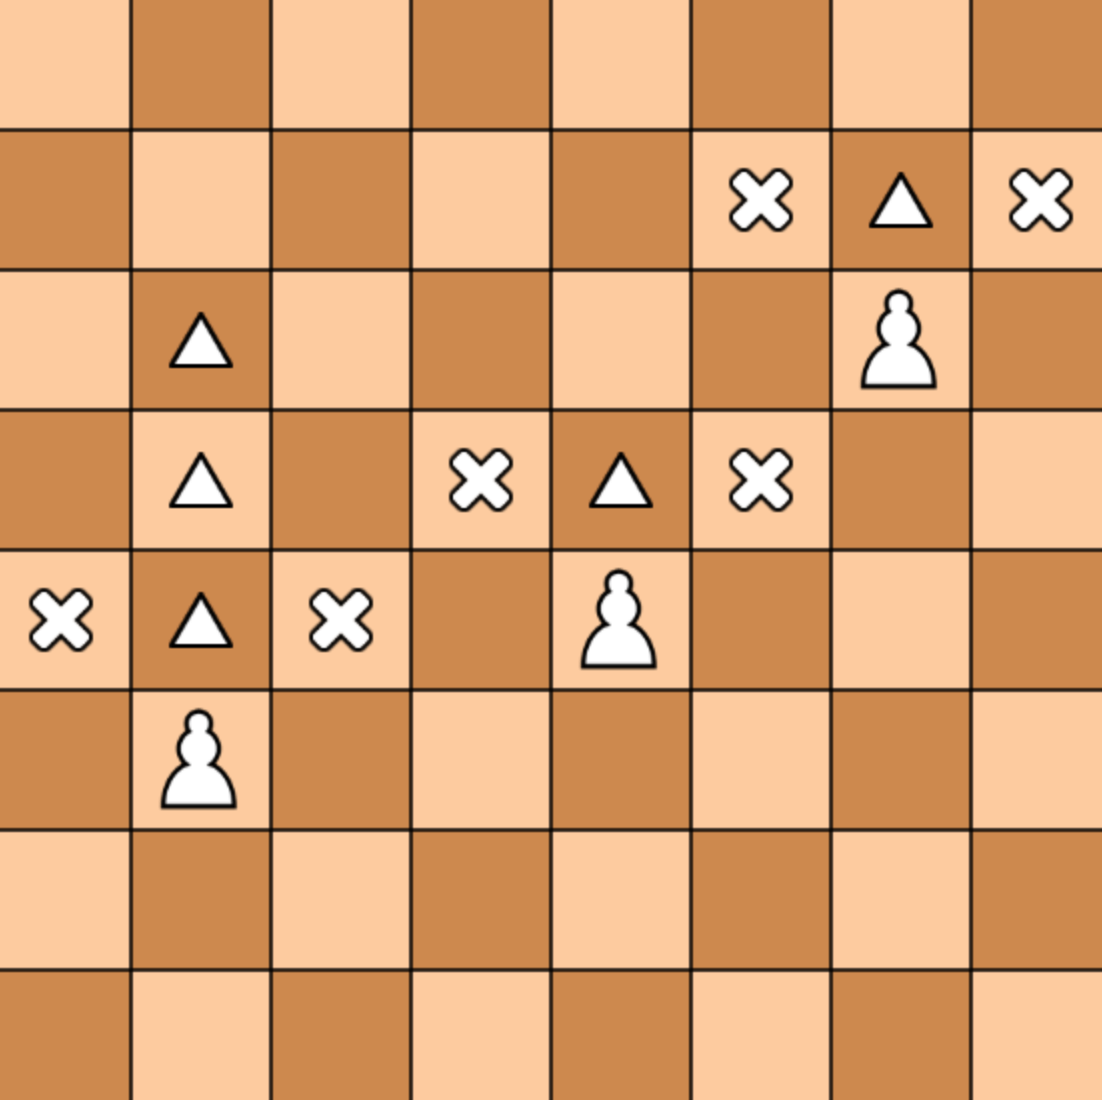 Move of the Pawn